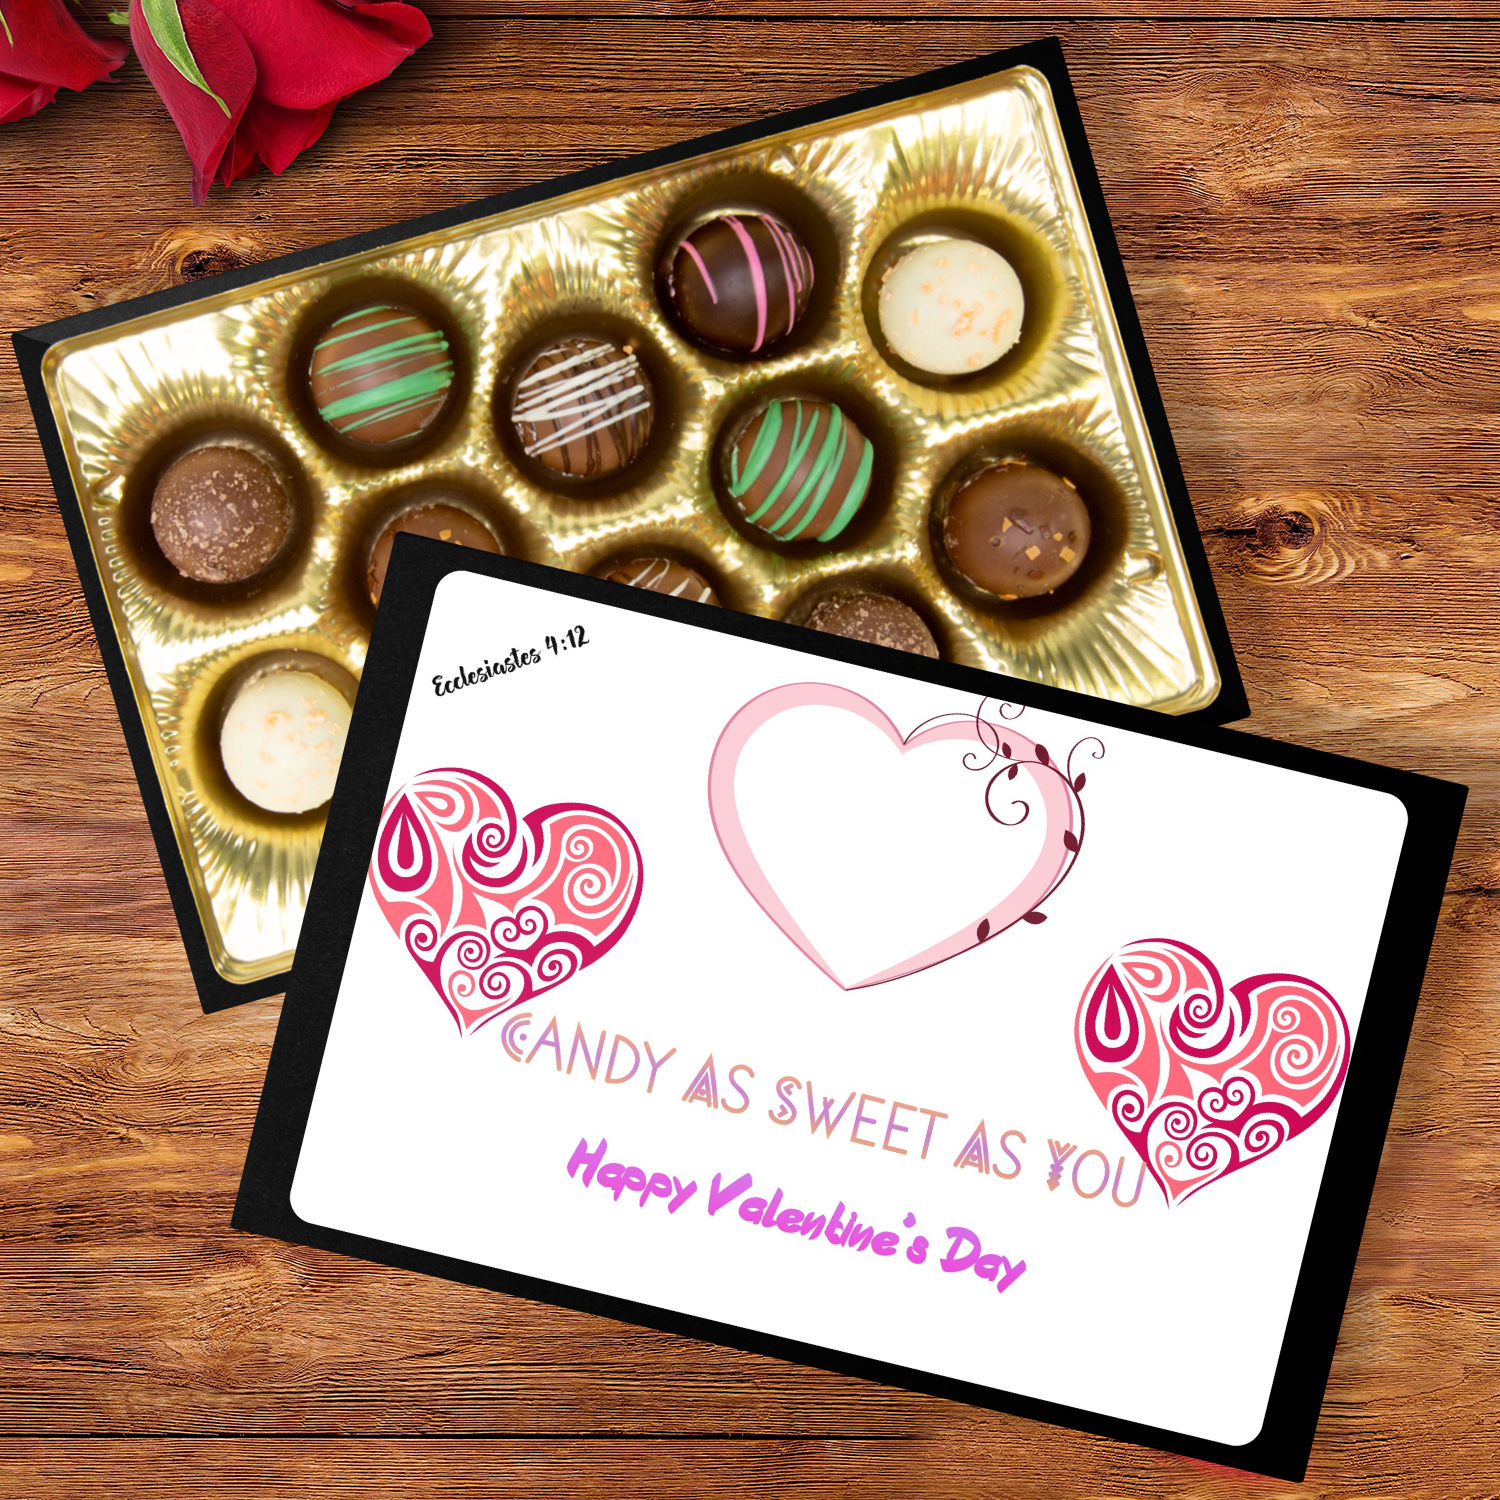 Sweet As You Ecclesiastes 4:12 Handmade Artisan Chocolate Truffle Valentine's Day 12 count Gift Box- Ships from The US - Chocolate Truffle Gift Box at TFC&H Co.